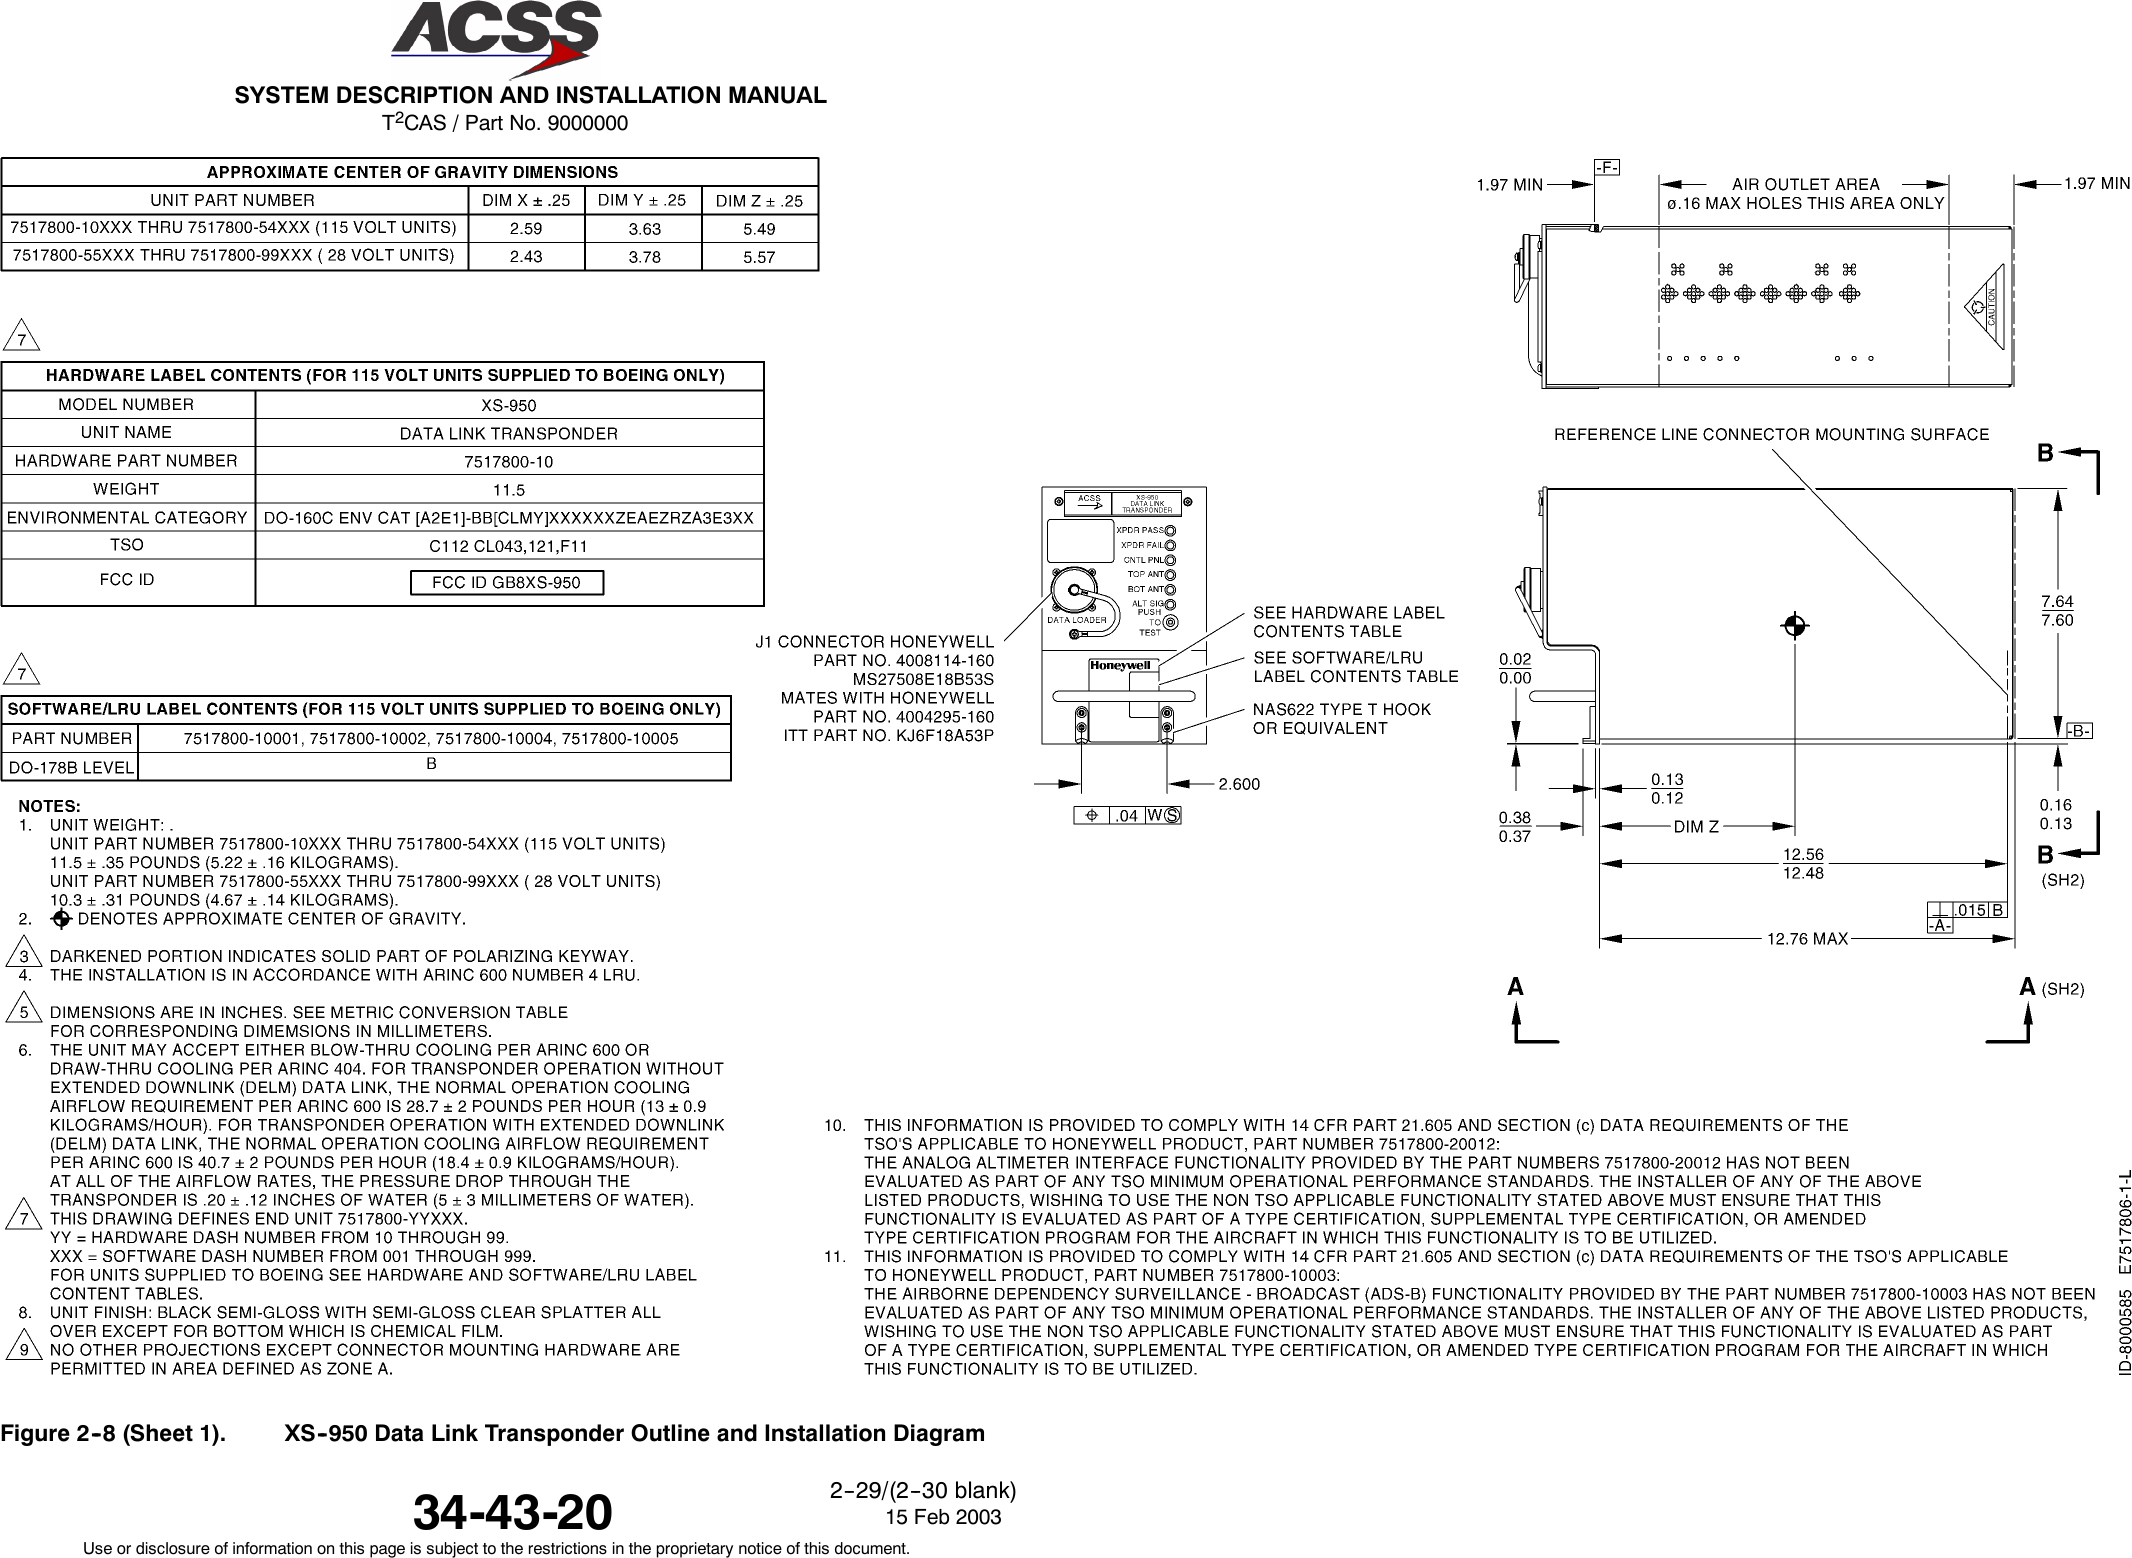 T2CAS / Part No. 9000000SYSTEM DESCRIPTION AND INSTALLATION MANUAL34-43-20 15 Feb 2003Use or disclosure of information on this page is subject to the restrictions in the proprietary notice of this document.2--29/(2--30 blank)Figure 2--8 (Sheet 1). XS--950 Data Link Transponder Outline and Installation Diagram